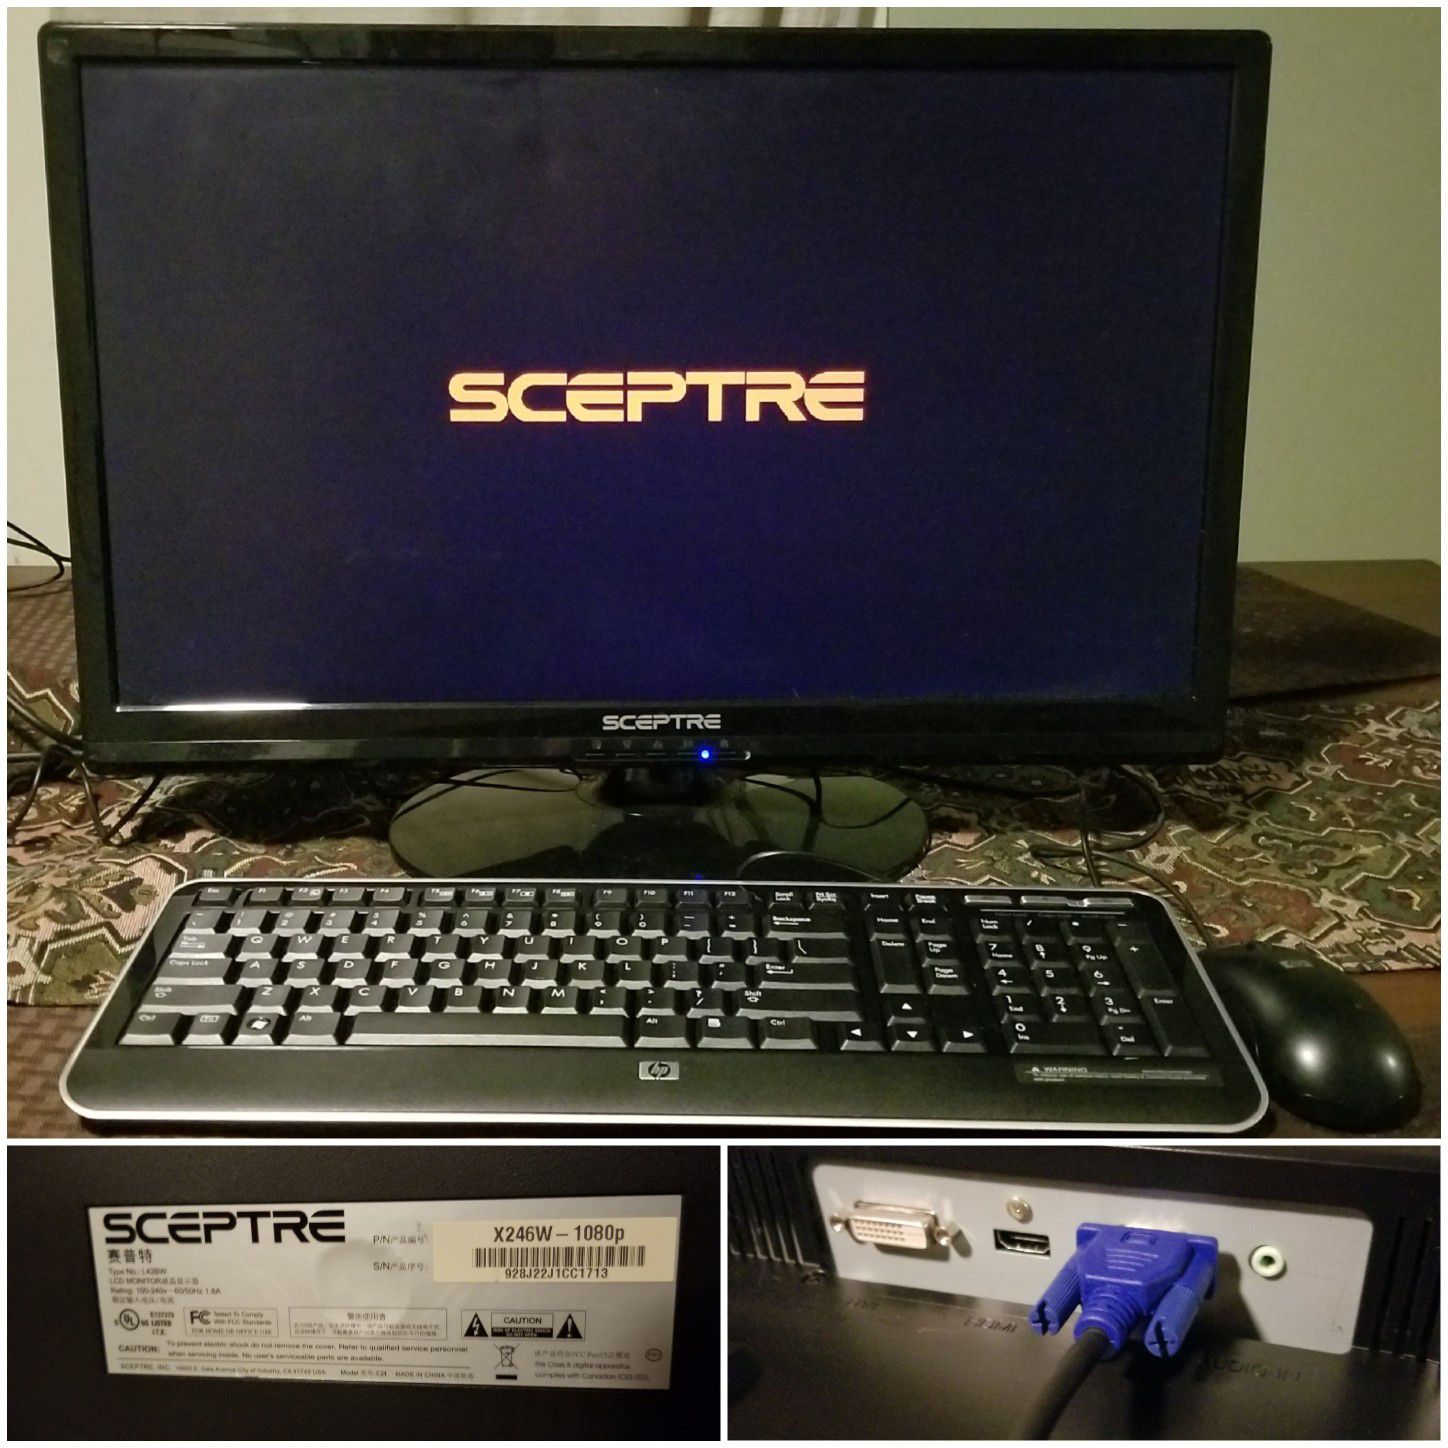 Sceptre X246W Computer monitor with HP Keyboard and HP Mouse